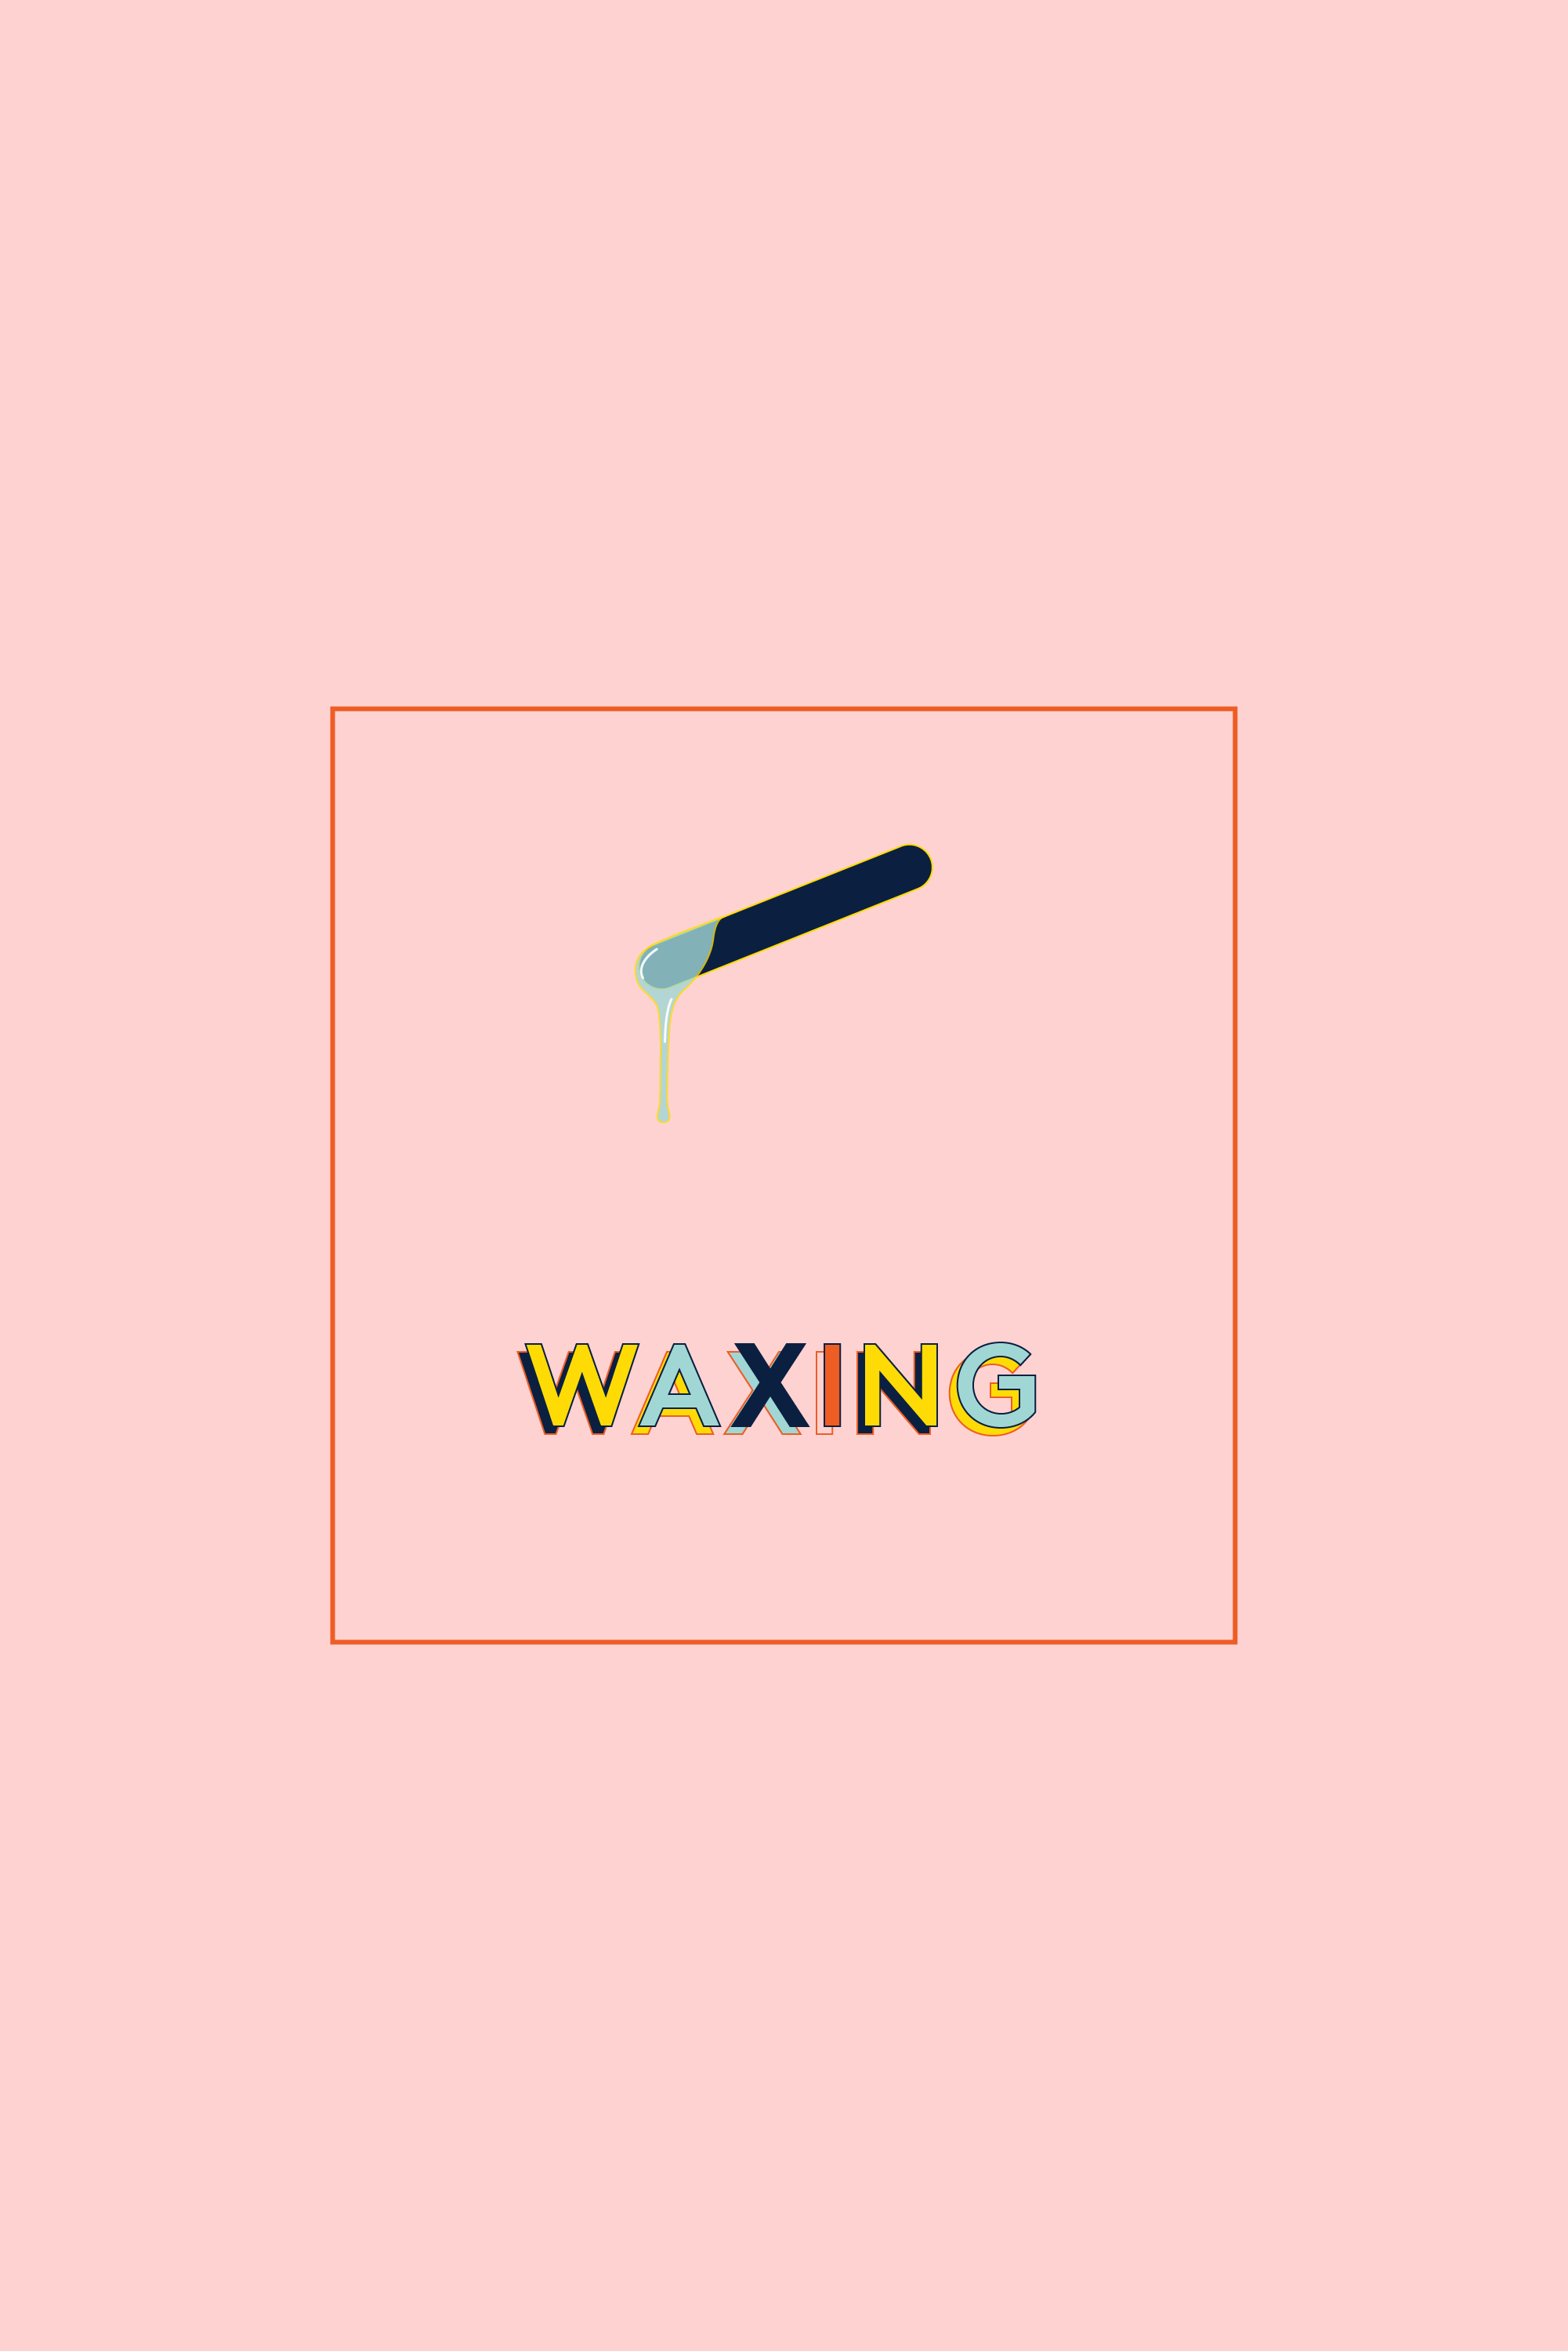 Waxing Logo - What Not To Do On Your Period Facials Masks